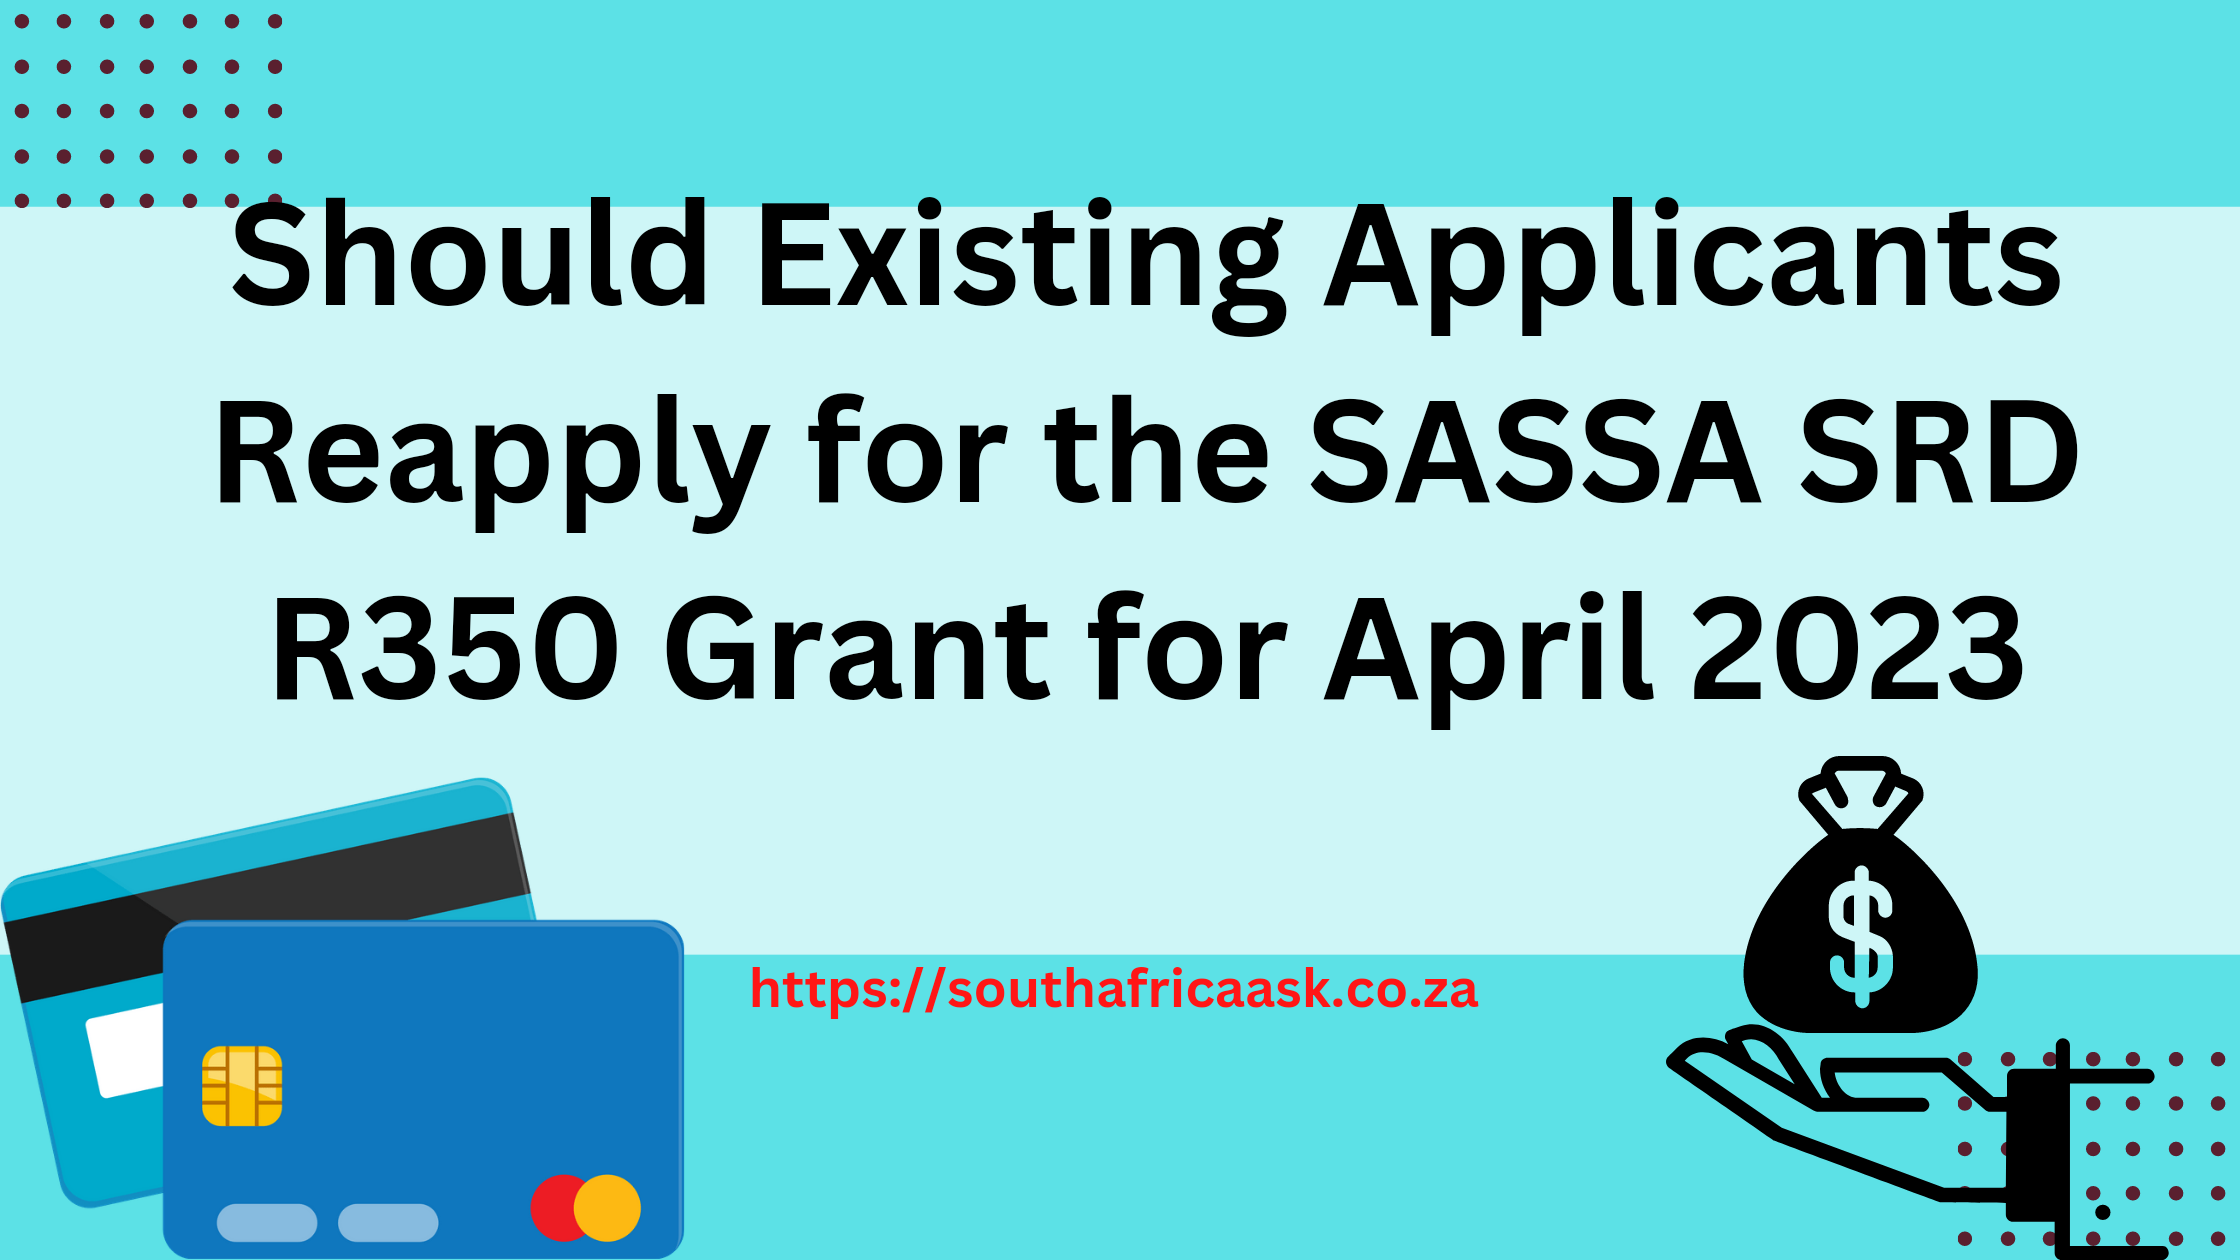 Should Existing Applicants Reapply for the SASSA SRD R350 Grant for April 2023